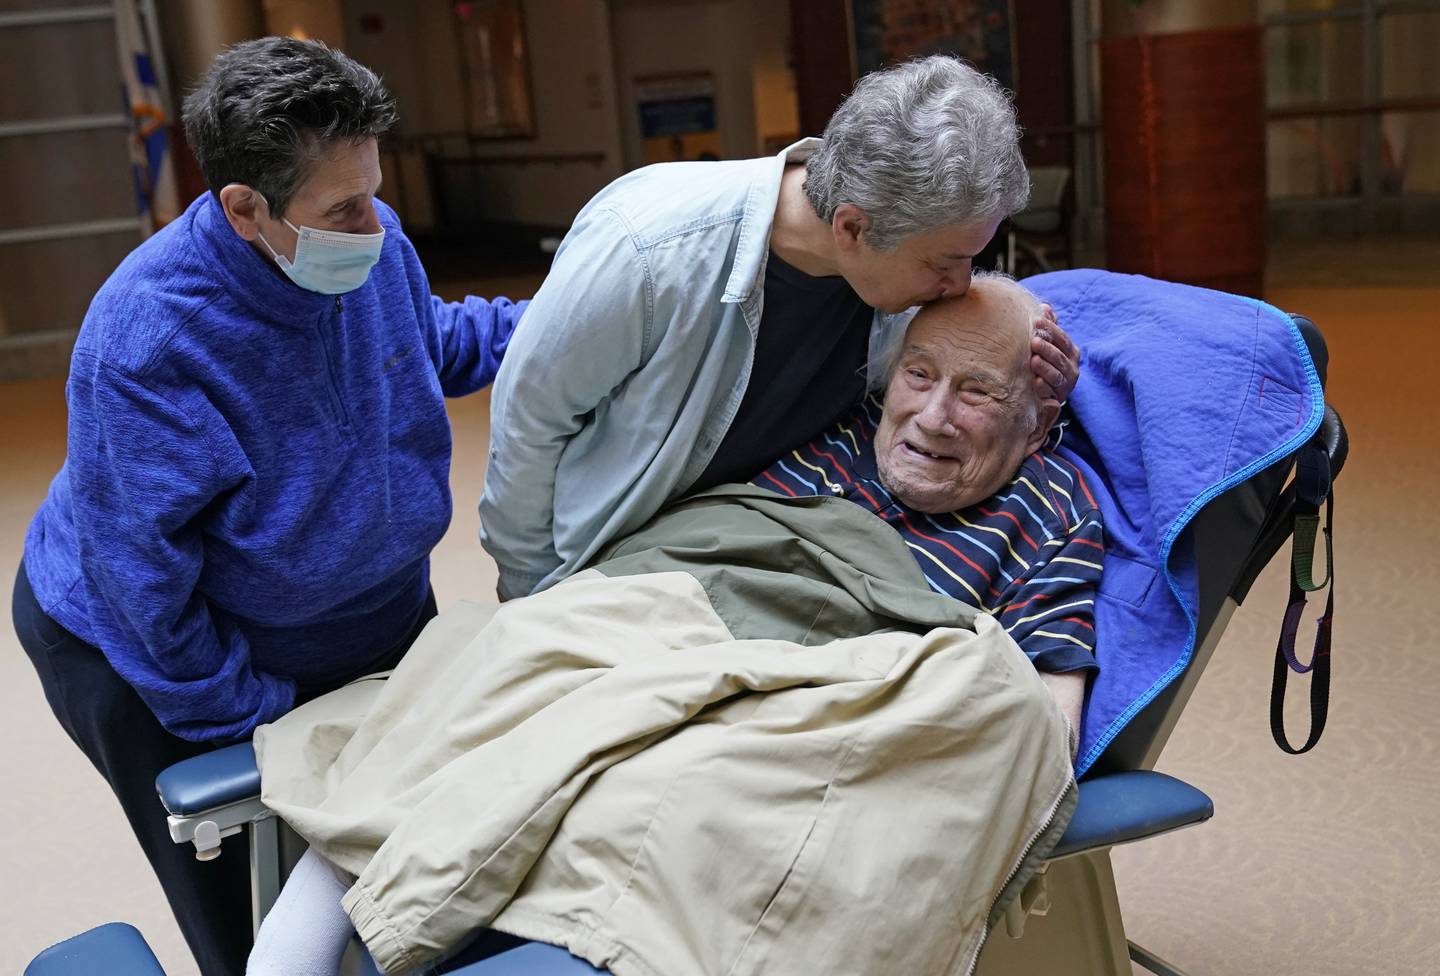 Melvin Goldstein, 90, smiles as his daughter Barbara Goldstein greets him in their first in-person, indoor family visit inside the Hebrew Home at Riverdale, March 28, 2021, in the Bronx borough of New York. AP